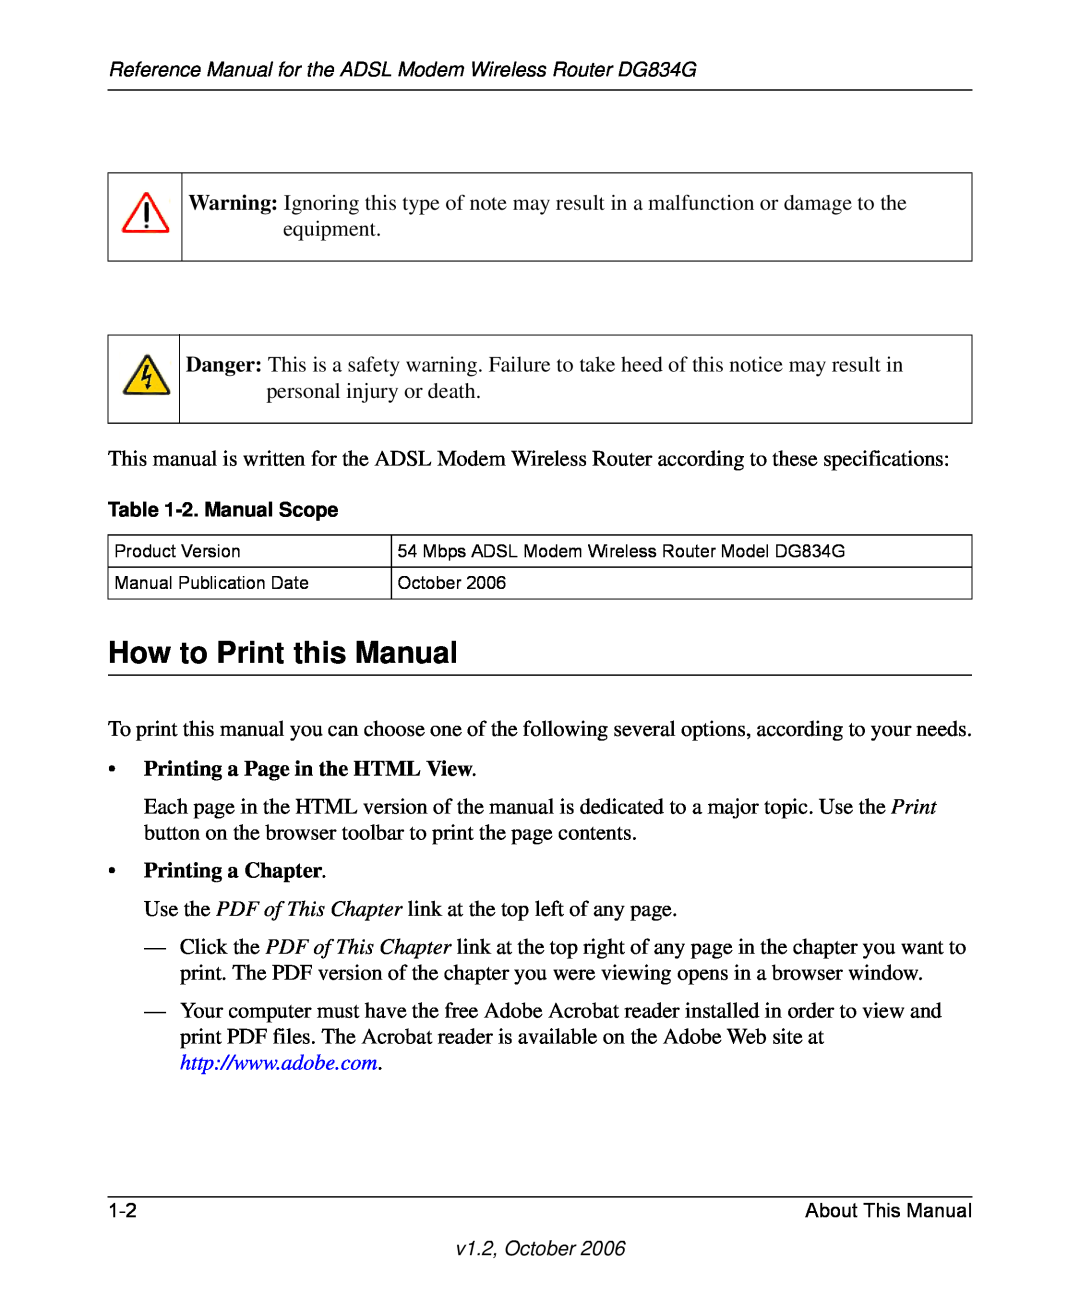 NETGEAR DG834G manual How to Print this Manual, Printing a Page in the HTML View, Printing a Chapter 